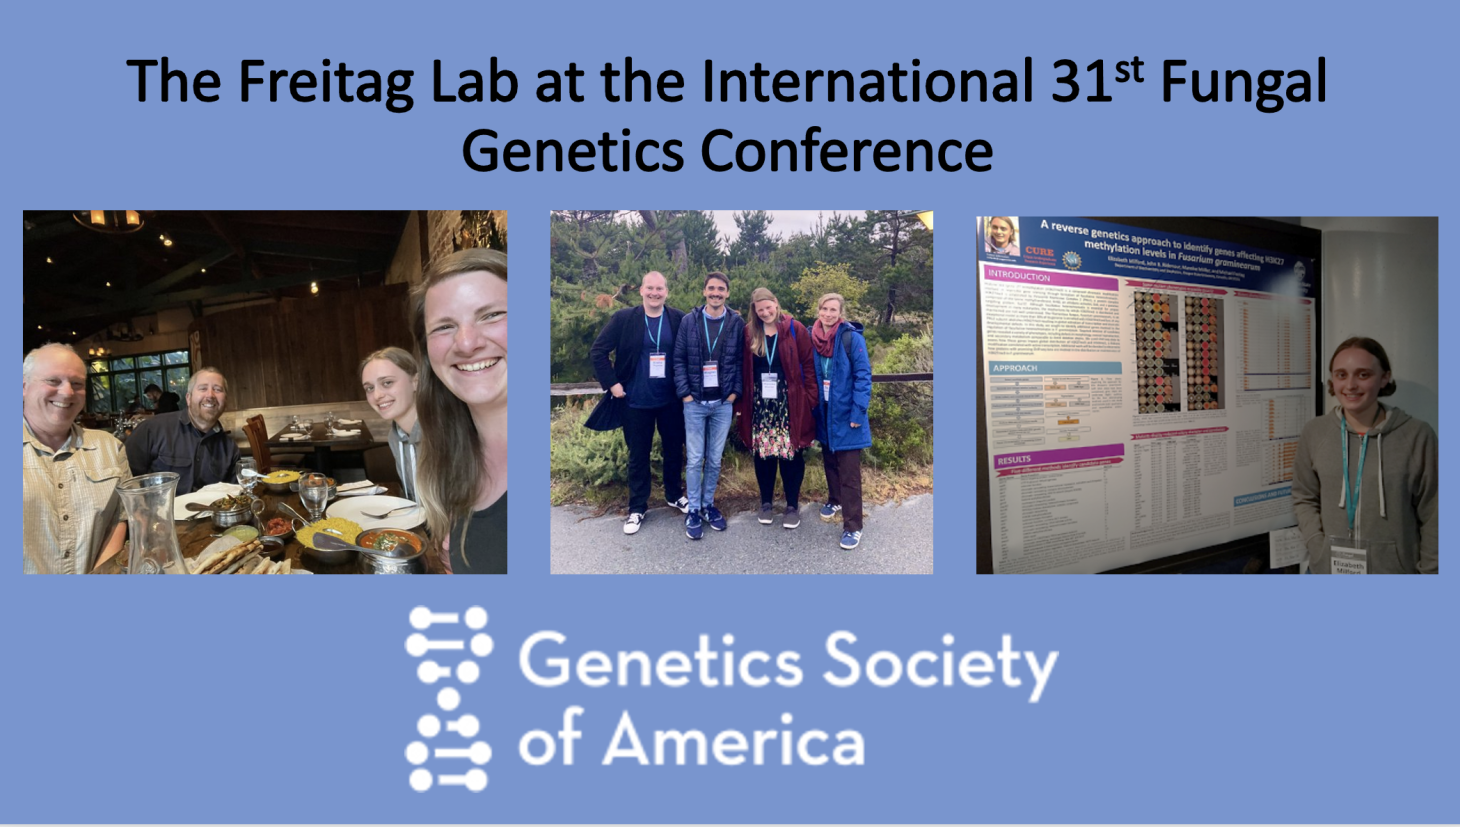 Three photos of members of the Freitag Lab at the Fungal Genetics Conference.